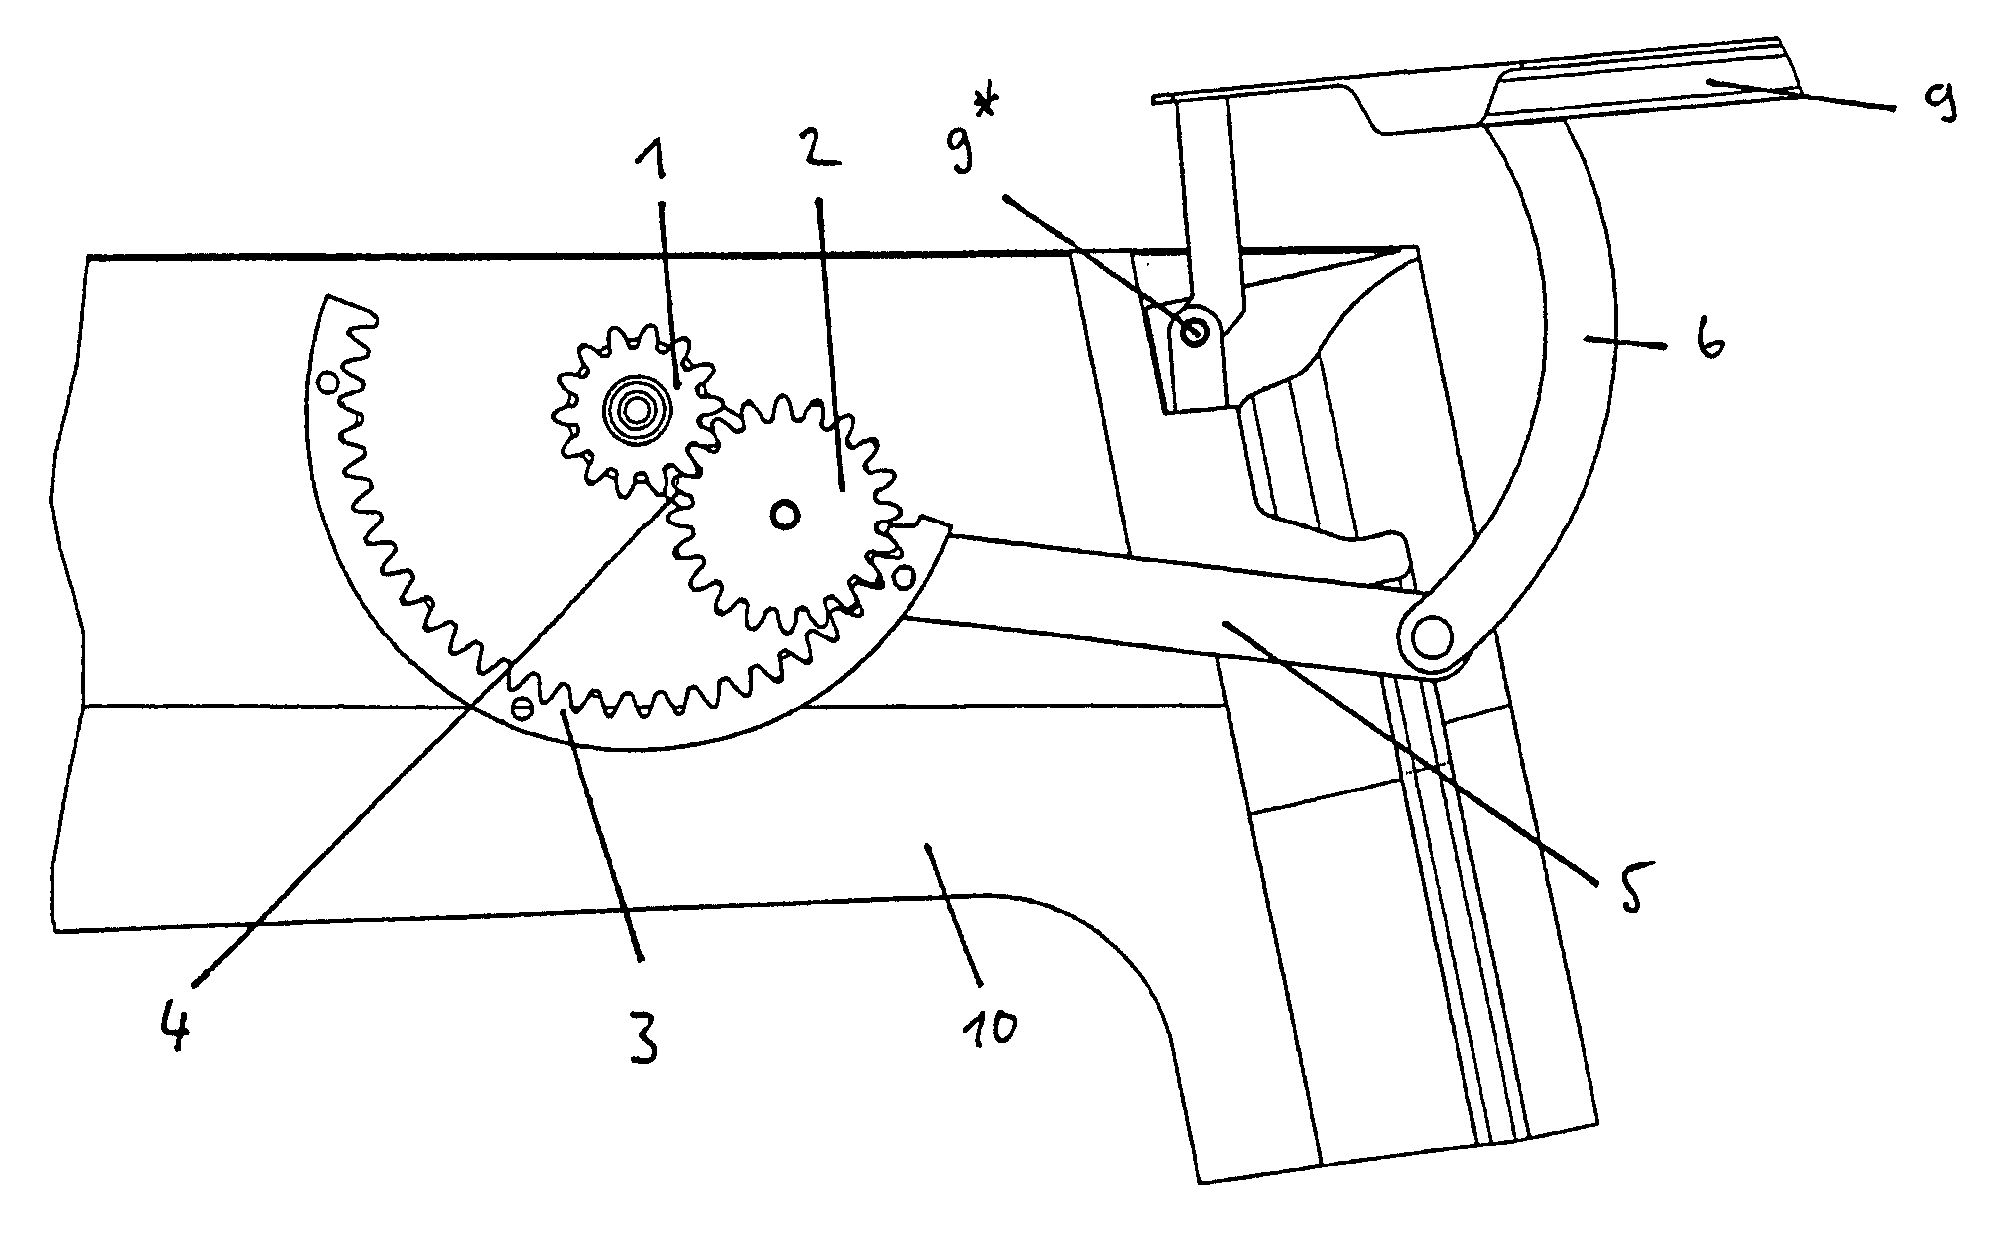 Servo drive for activating a tailgate of a motor vehicle